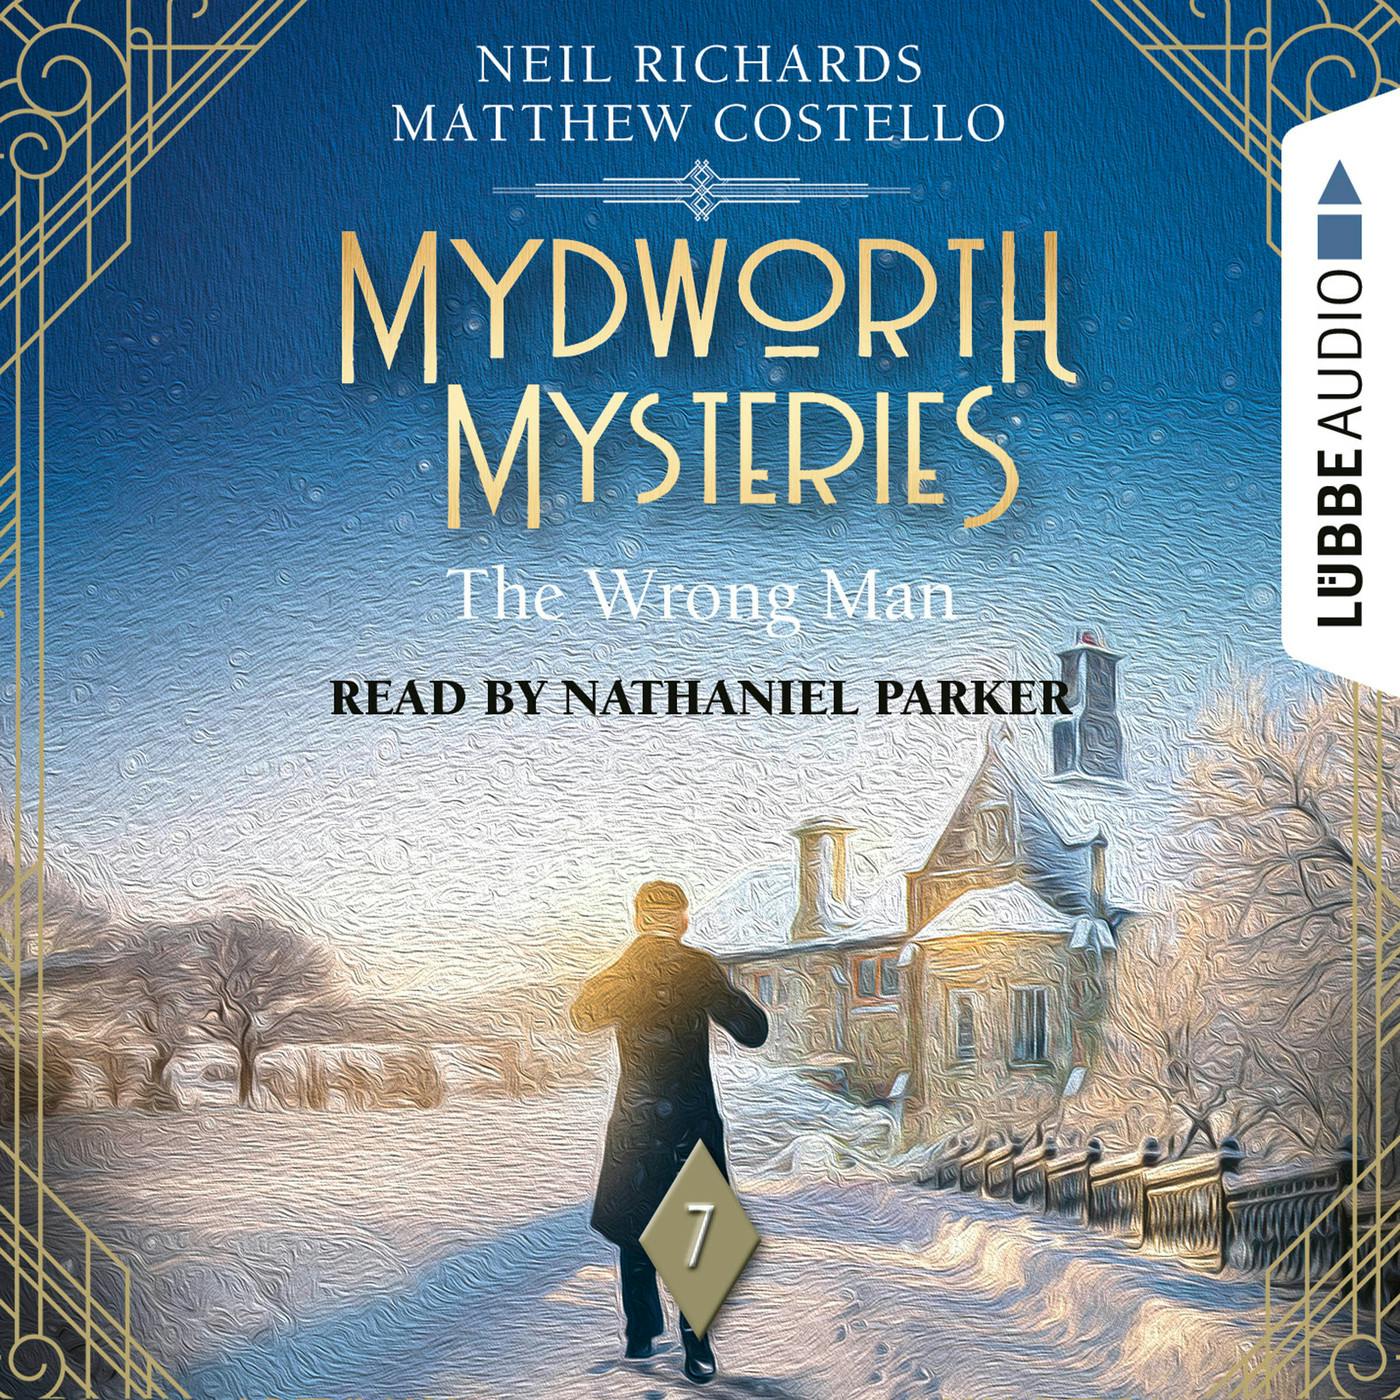 The Wrong Man - Mydworth Mysteries - A Cosy Historical Mystery Series, Episode 7 (Unabridged) - Matthew Costello, Neil Richards